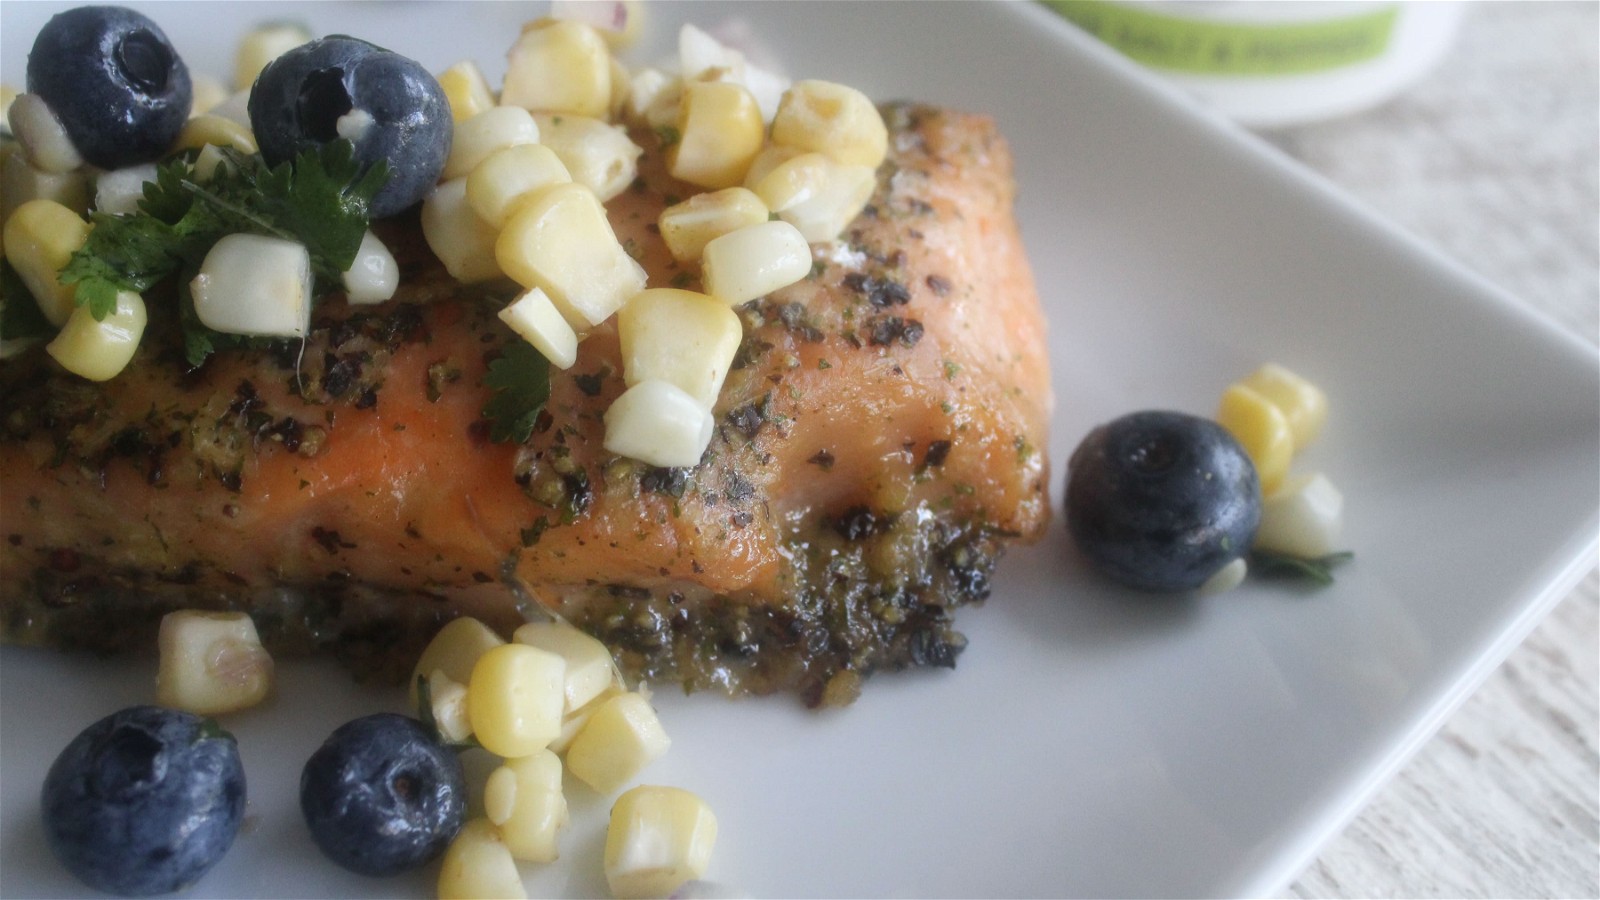 Image of ROASTED SALMON FILET WITH SWEET CORN AND BLUEBERRY RELISH